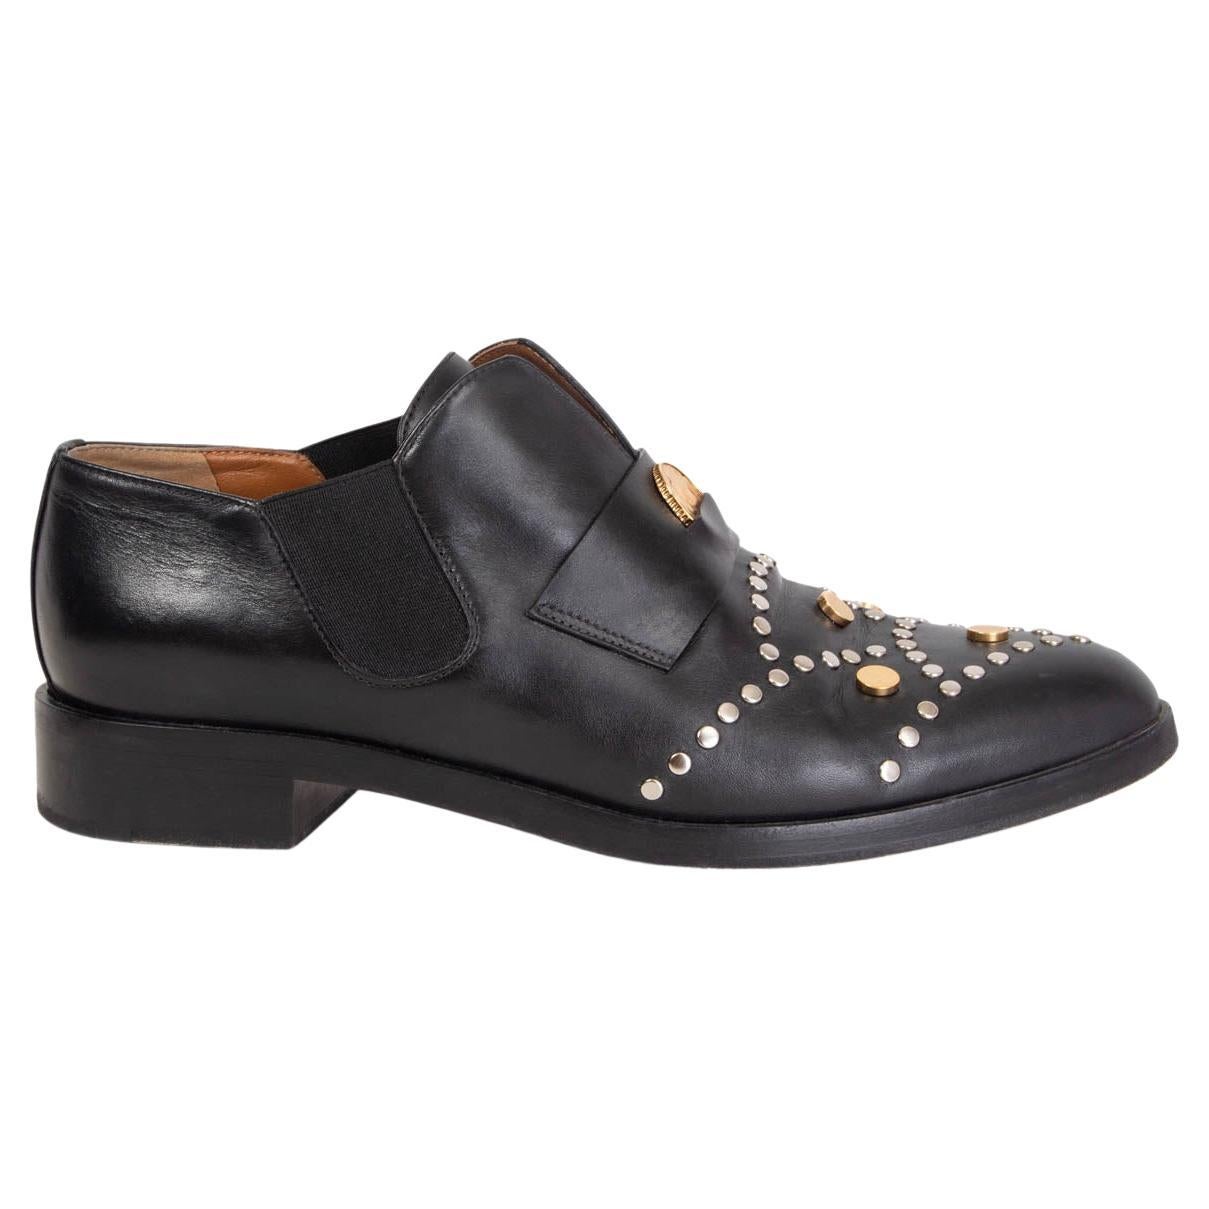 CHLOE black leather STUDDED GLORY PENNY Loafers Shoes 40